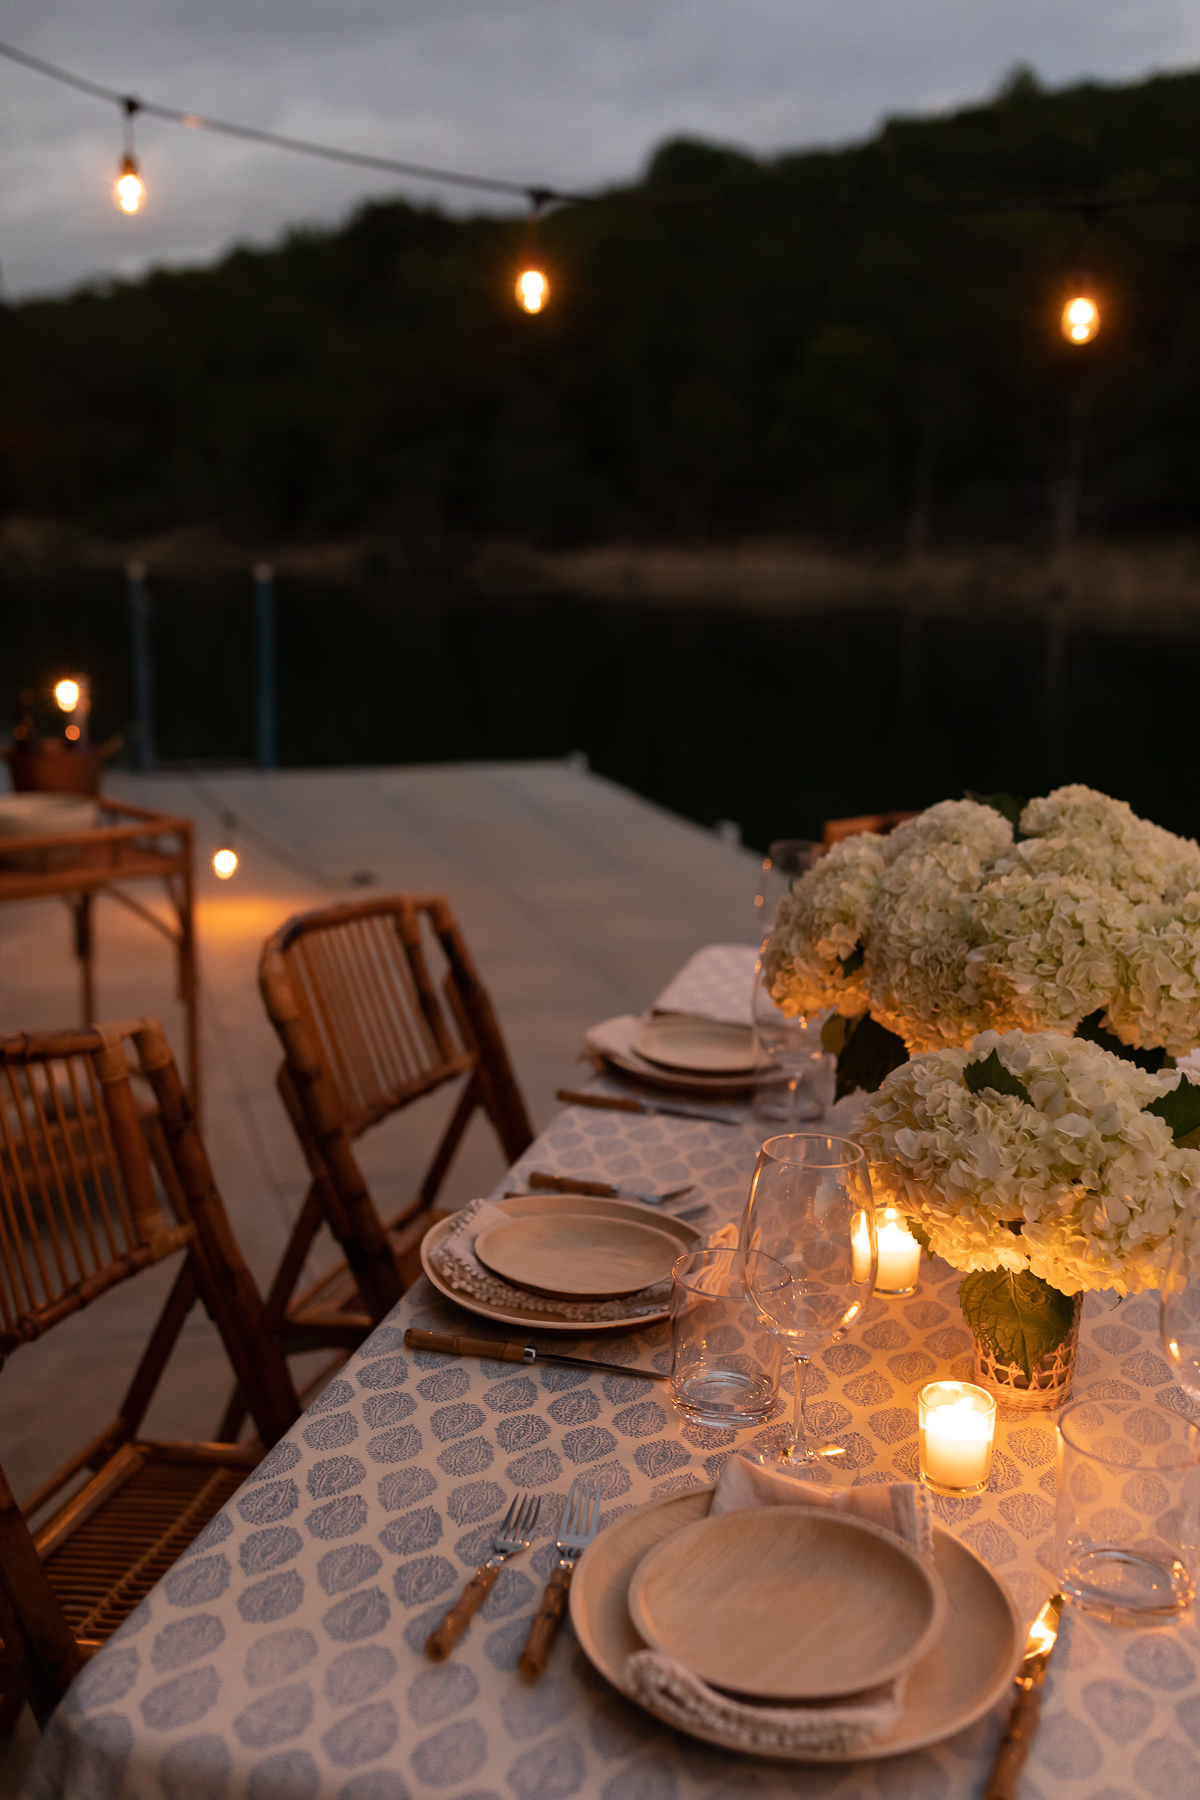 A blue and white table cloth set with bamboo plates and an al fresco dining view of the water